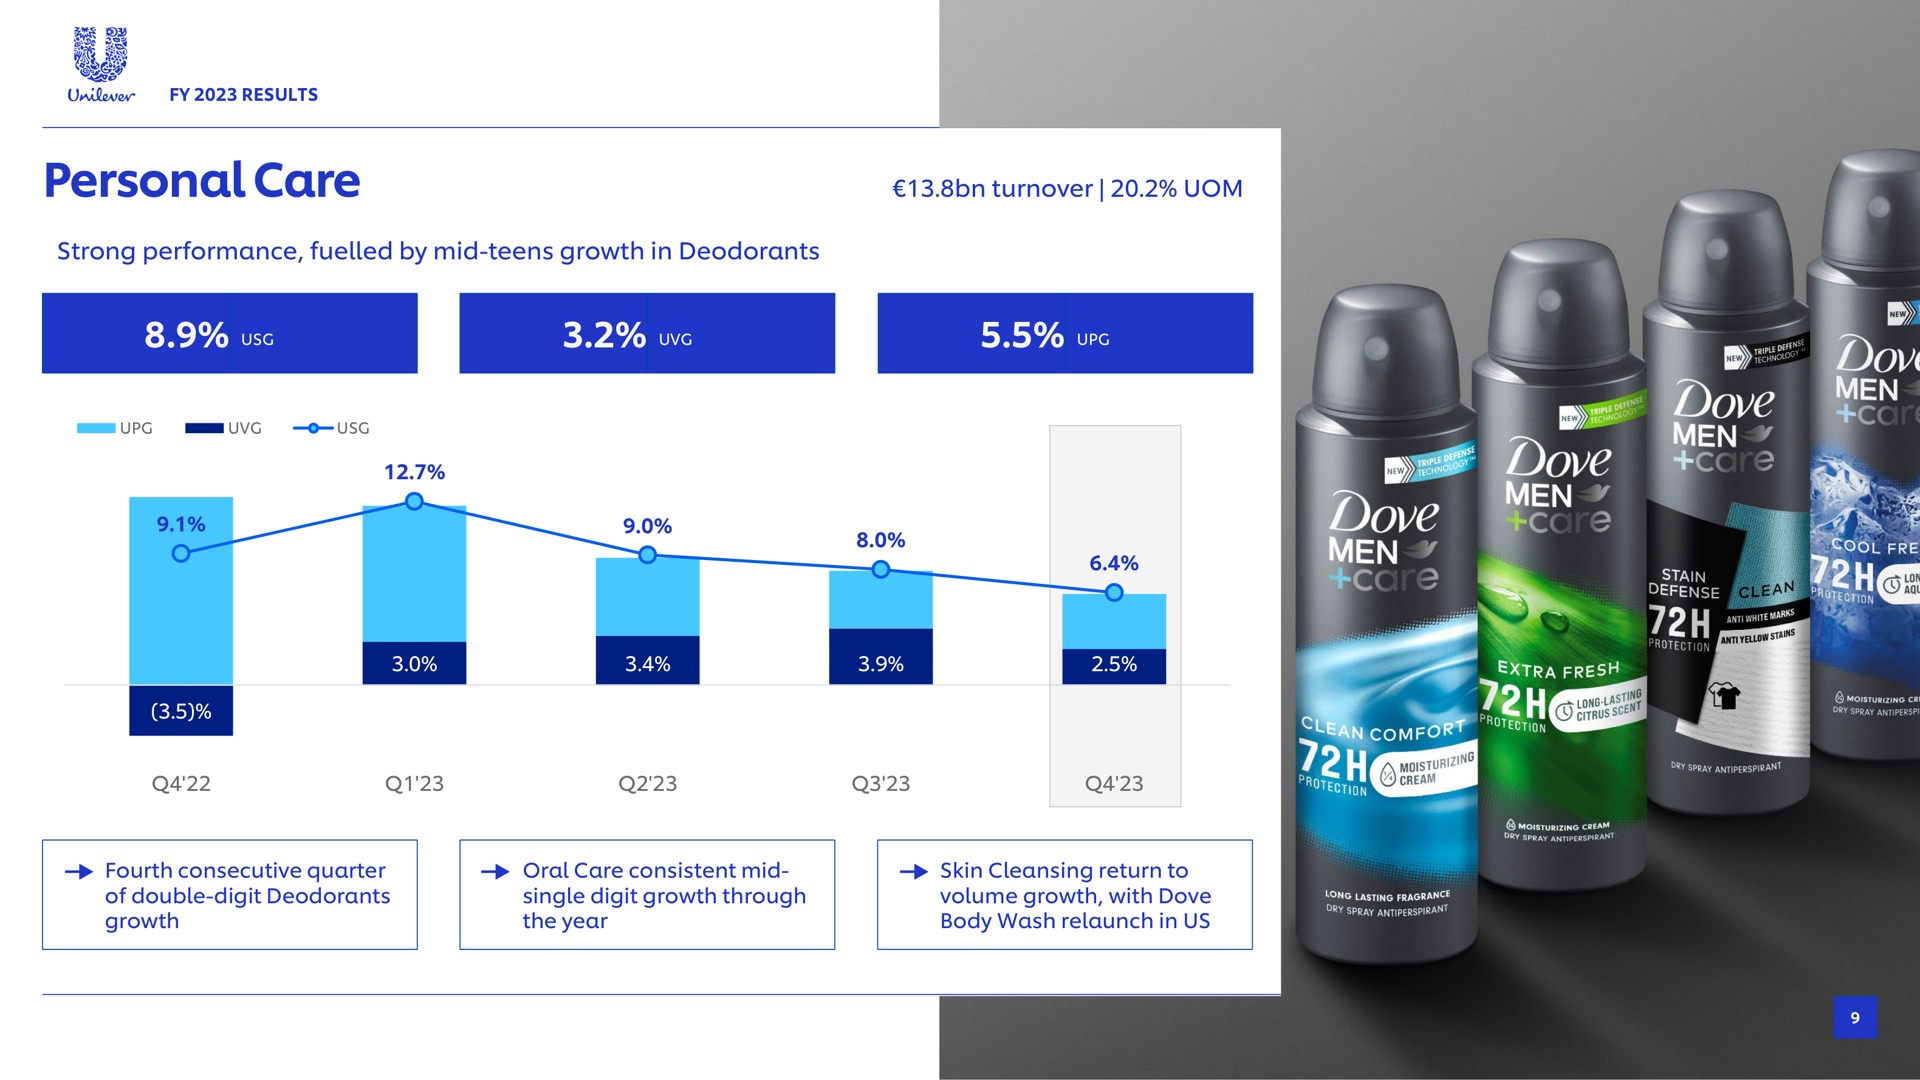 personal care turnover strong performance fuelled by mid teens growth in deodorants say call tas fourth consecutive quarter of double digit deodorants growth oral consistent mid skin cleansing return to single digit growth through the year volume growth with dove body wash relaunch in us redan | Unilever